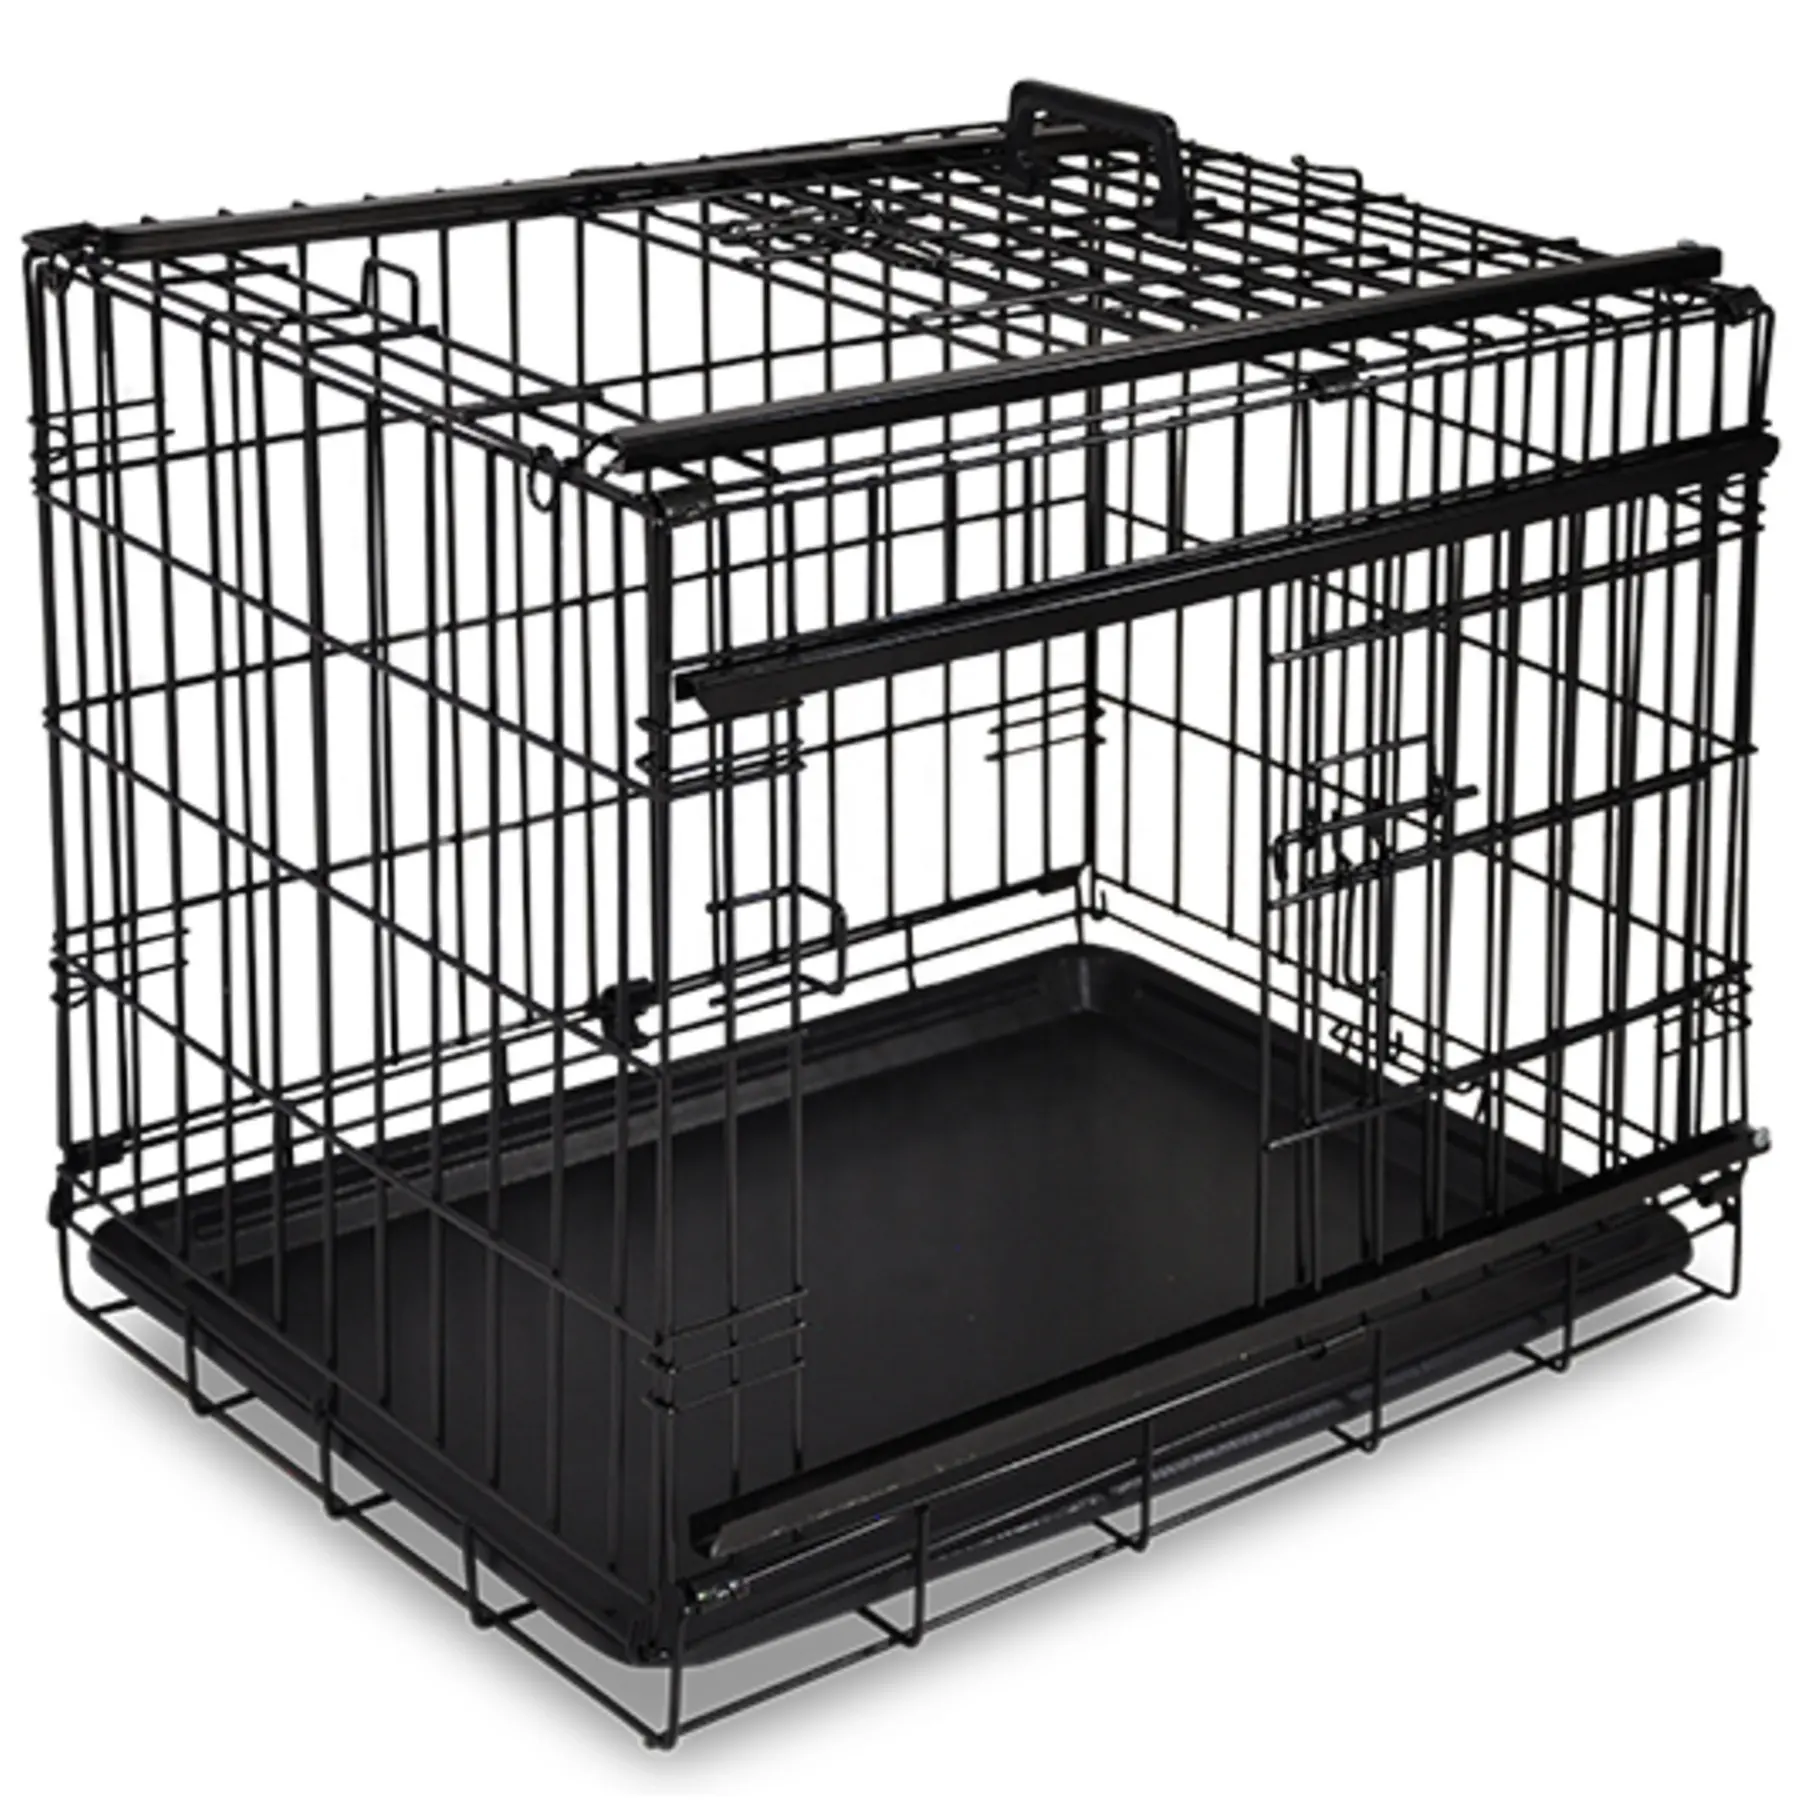 Heavy duty Commercial House Dog Kennels Cages with Sliding Door